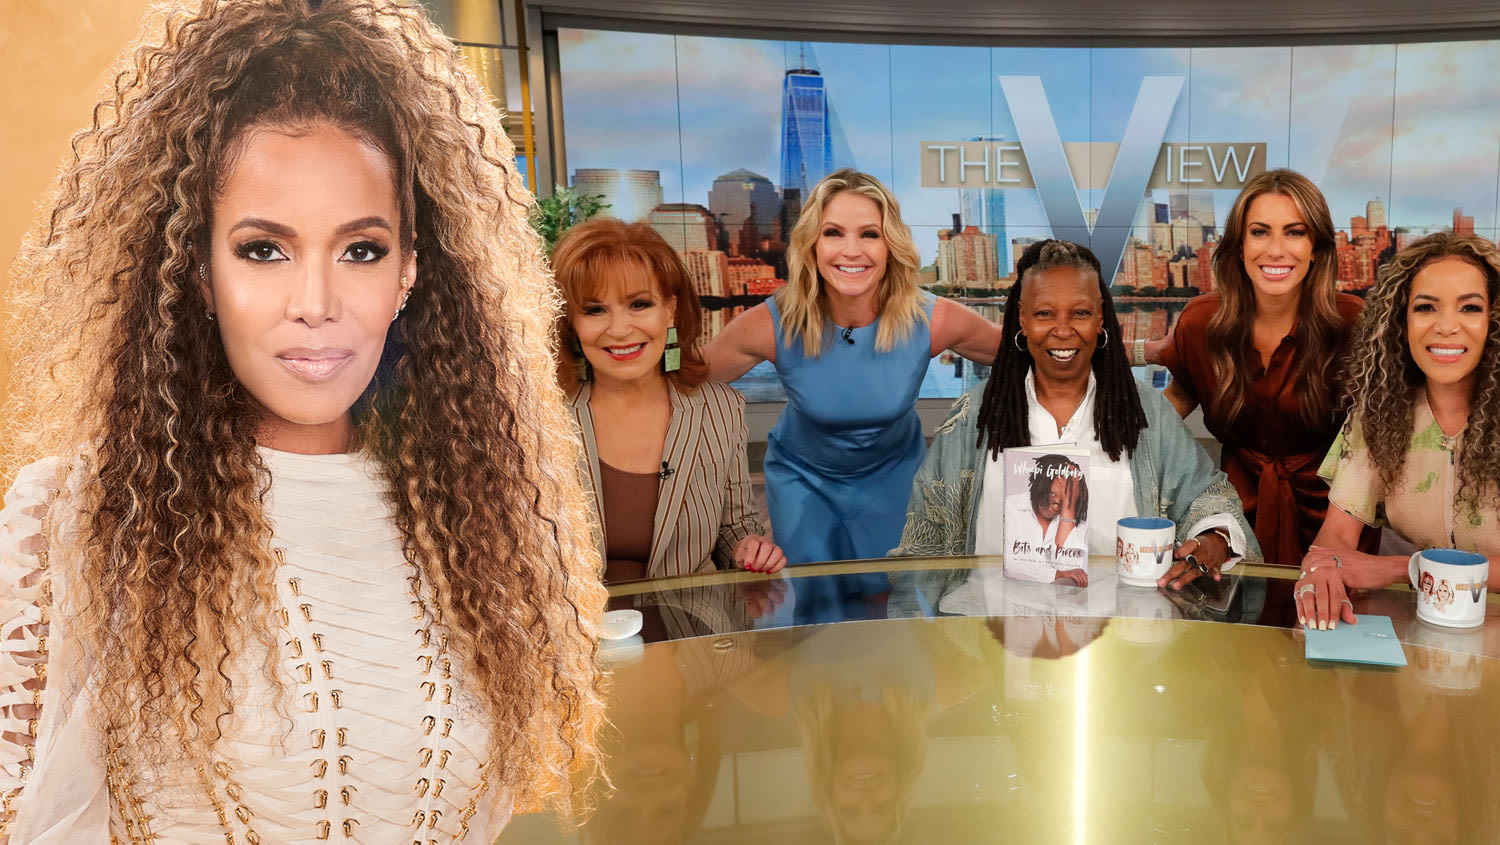 Sunny Hostin On Former ‘The View’ Co-Hosts Who Speak Negatively Of Their Experience On Show: “I’m Always Surprised”